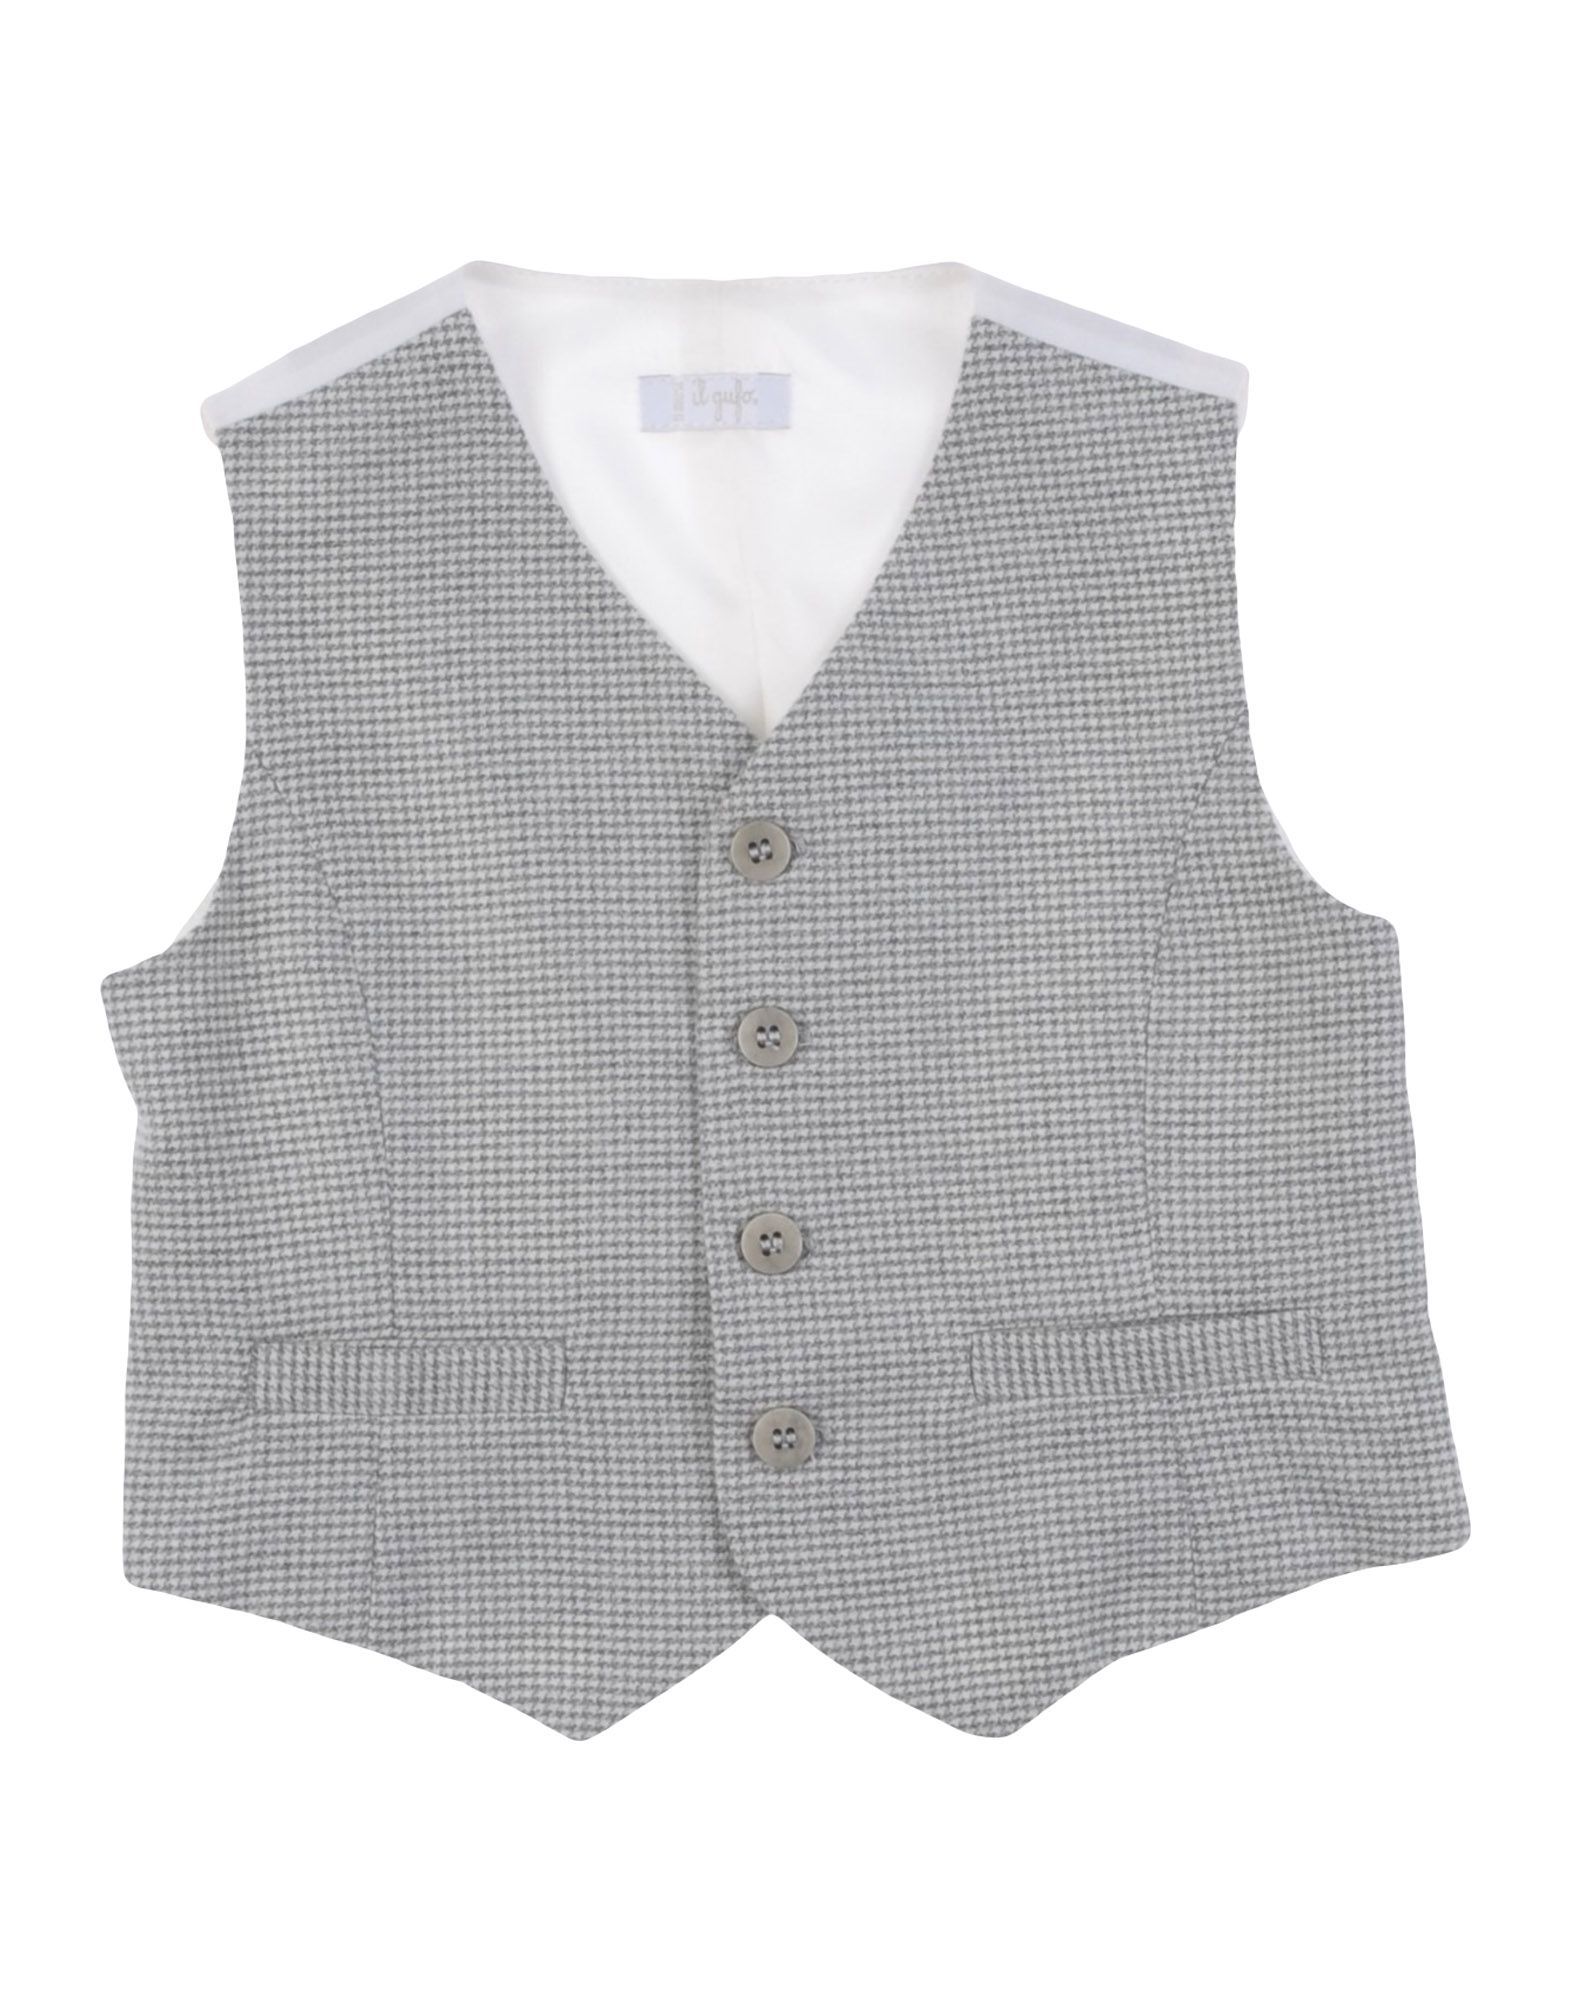 flannel, plain weave, no appliqu�s, houndstooth, multipockets, button closing, v-neckline, single-breasted , sleeveless, wash at 30� c, dry cleanable, iron at 110� c max, do not bleach, do not tumble dry, button closing waistcoat